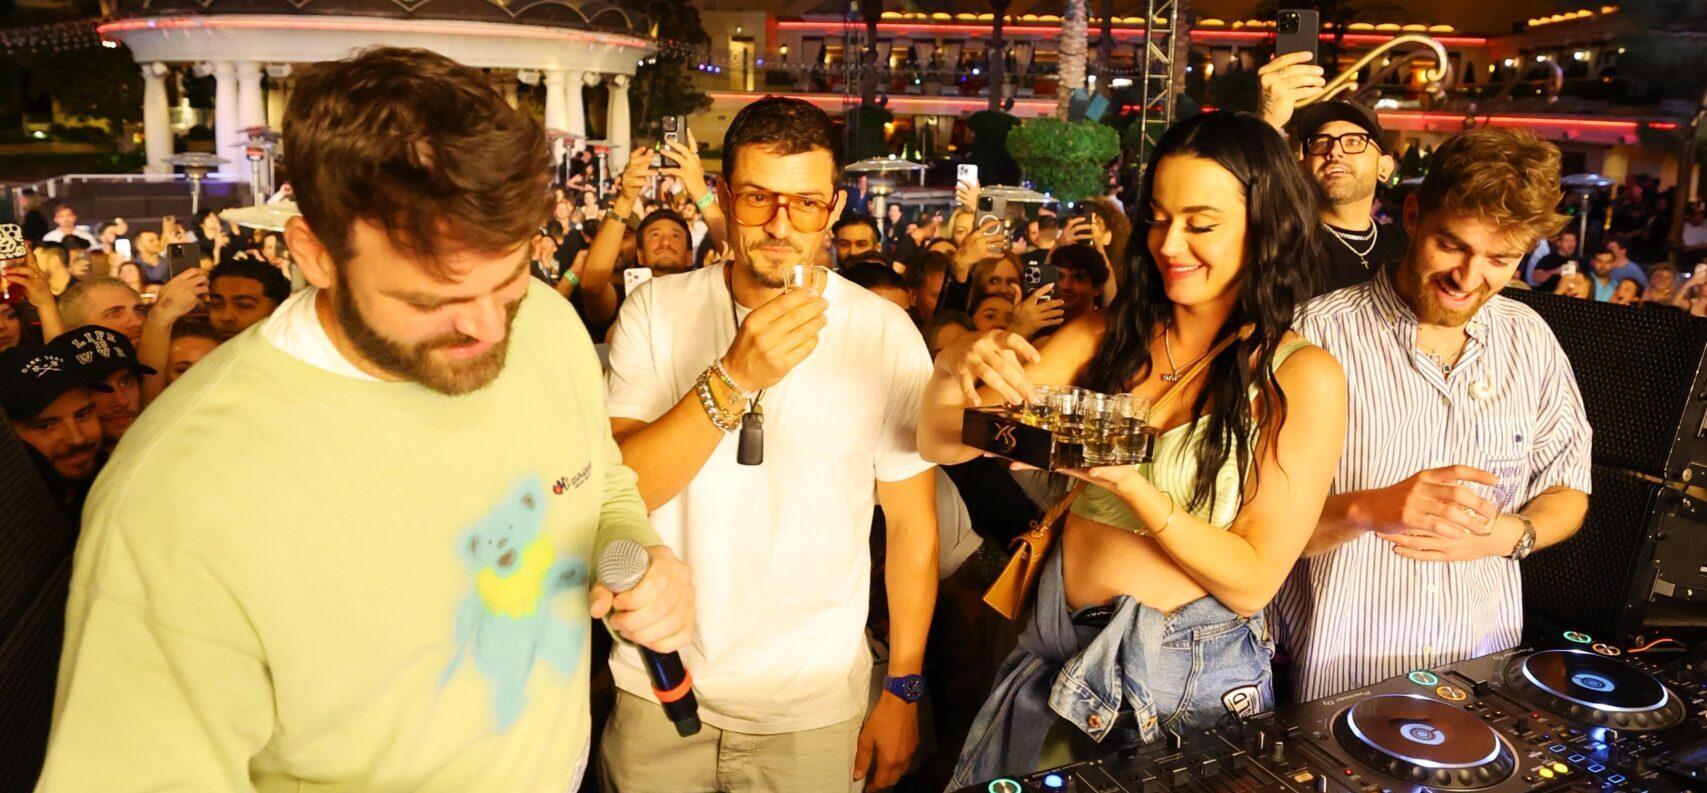 Katy Perry Parties Hard With The Chainsmokers In Vegas Until 3 A.M.